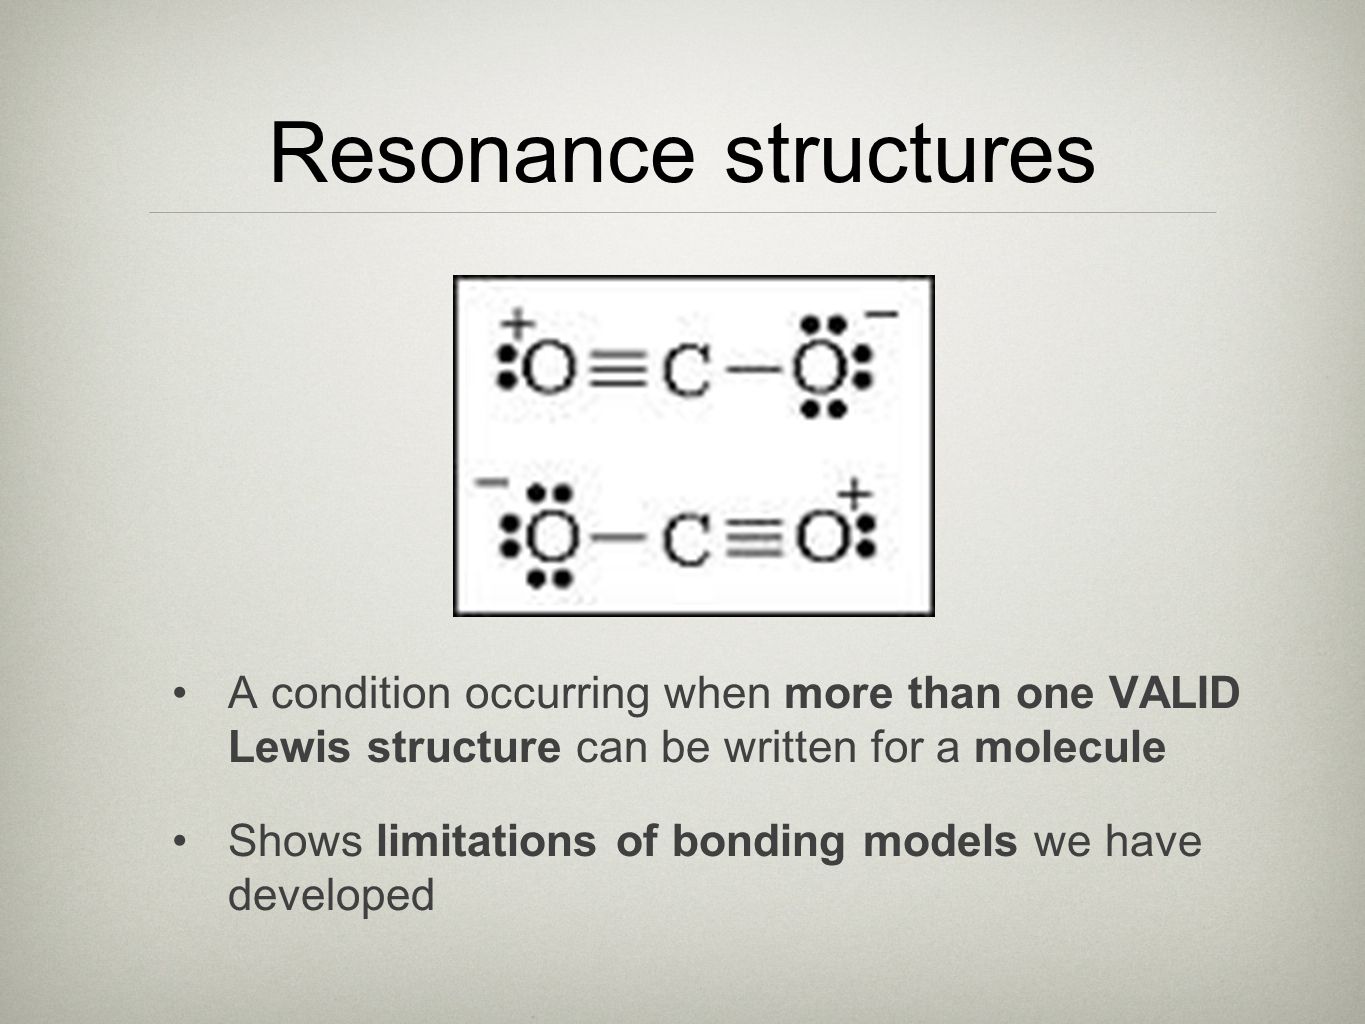 Resonance structures A condition occurring when more than one VALID Lewis structure can be written for a molecule Shows limitations of bonding models we have developed